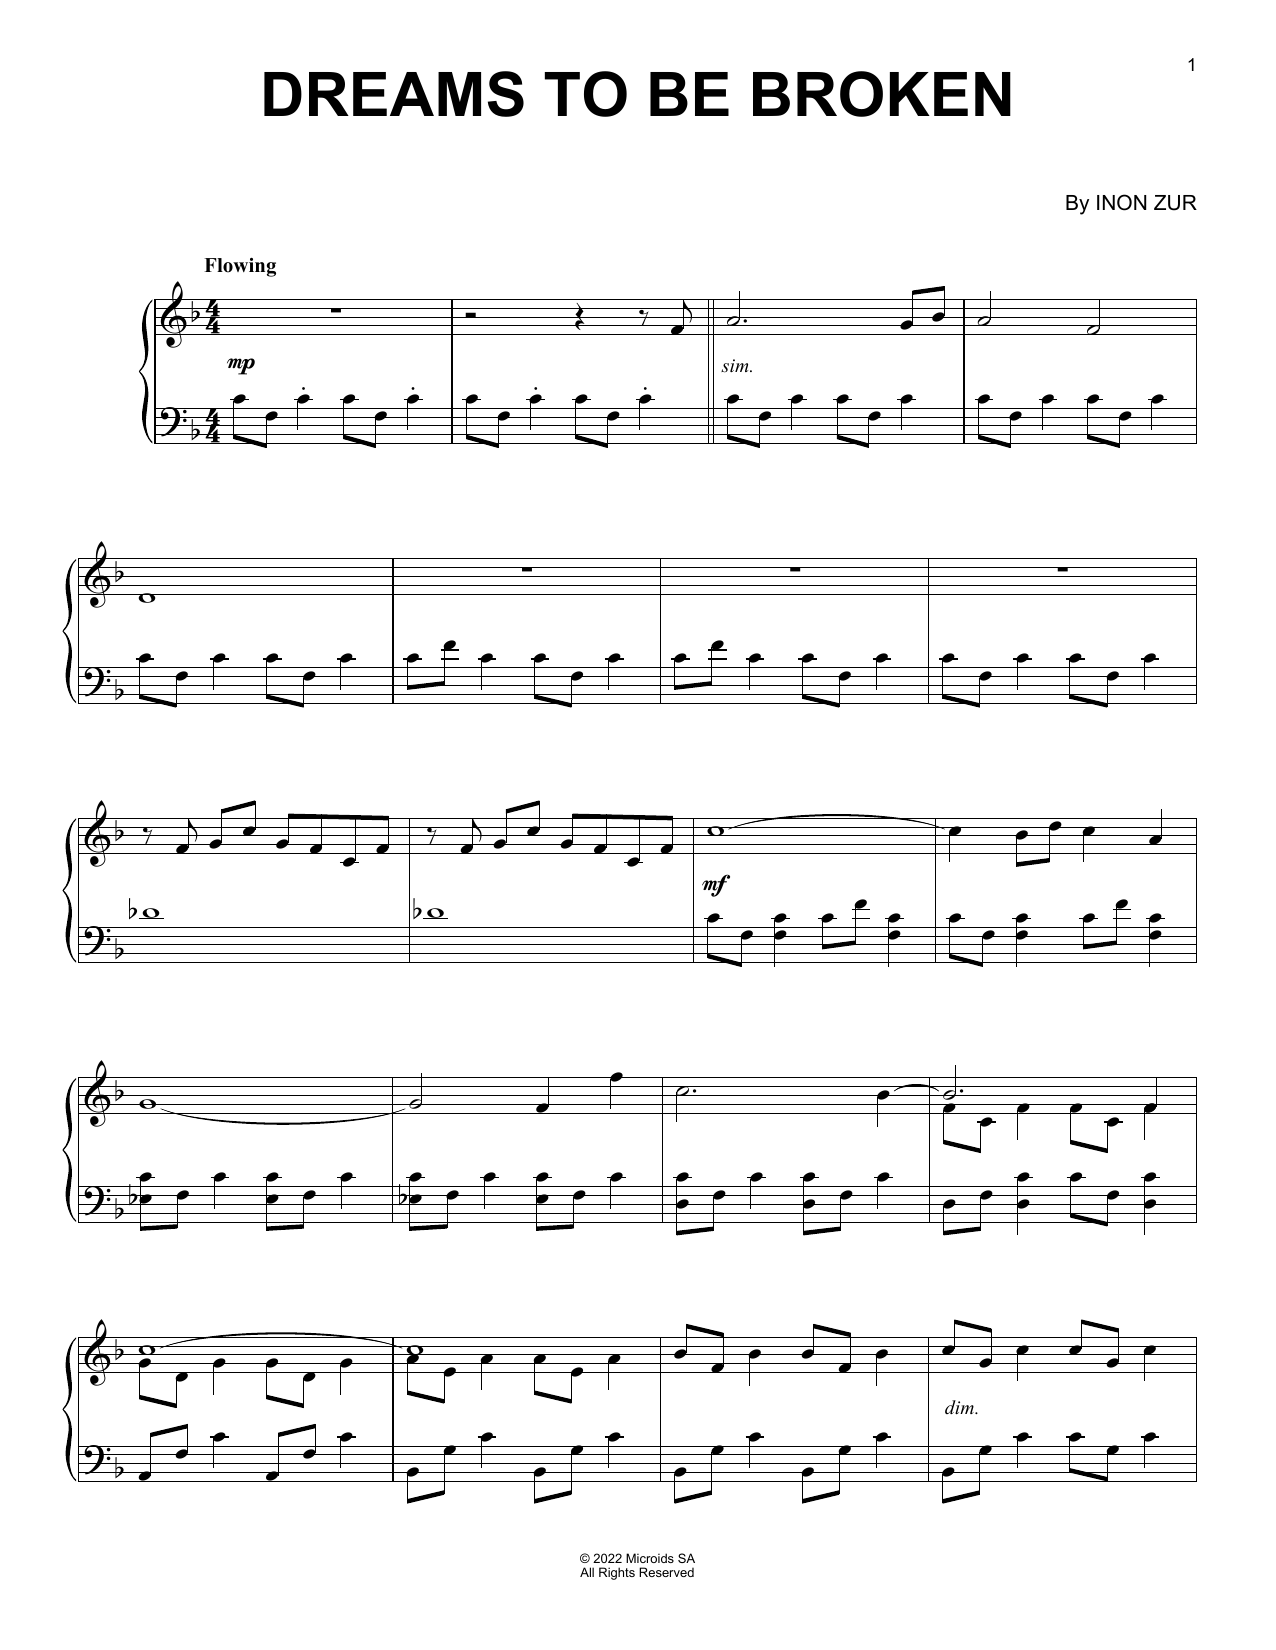 Download Inon Zur Dreams To Be Broken (from Syberia: The Sheet Music